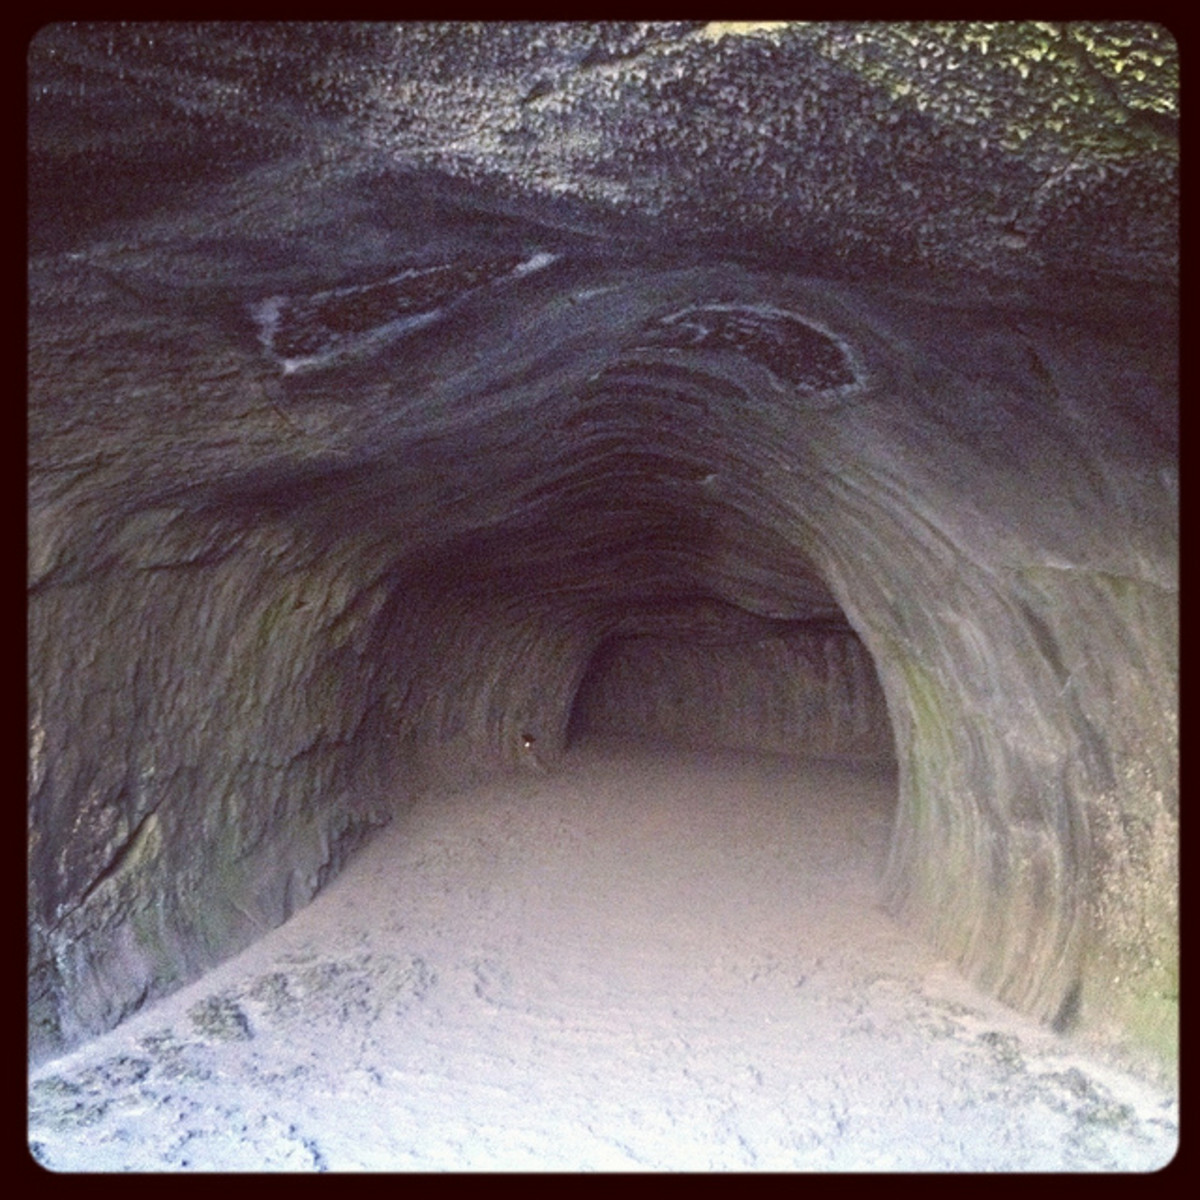 As you enter the cave, light pours in, but as you venture further in, and go around this corner, all light disappears